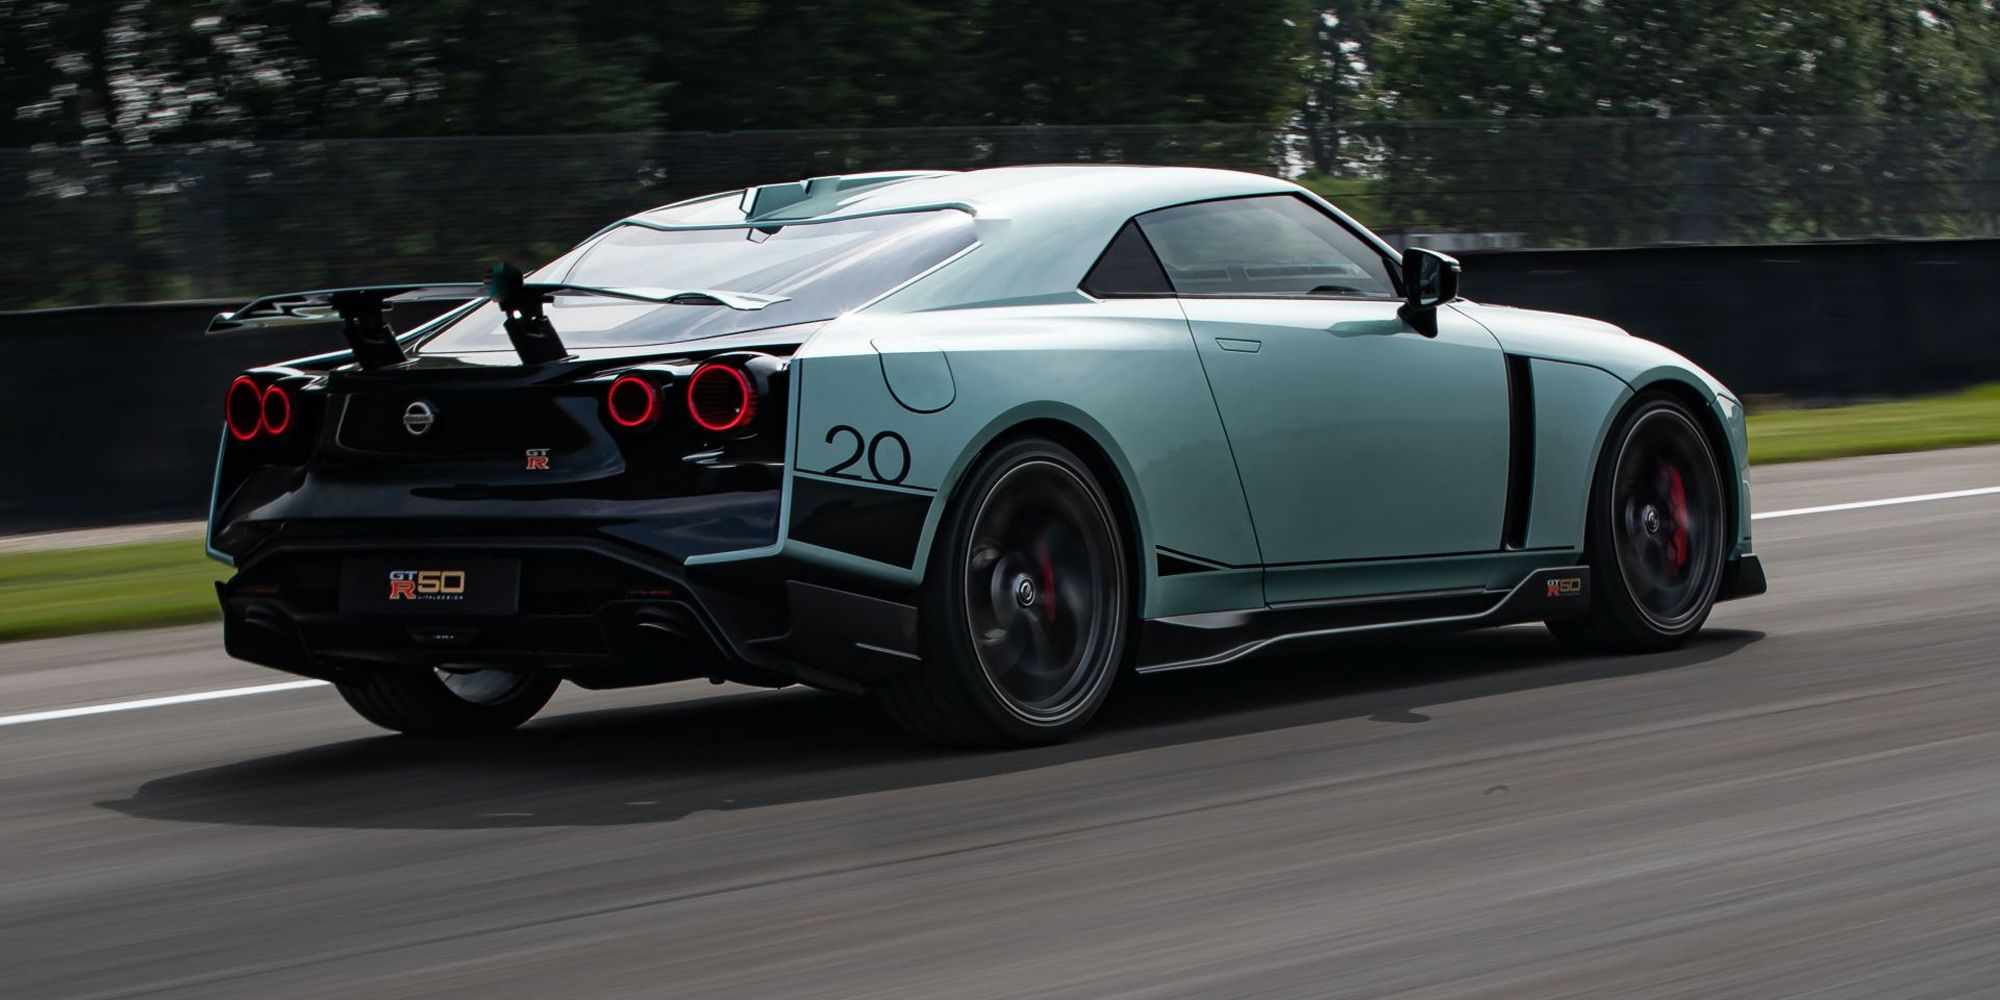 A teal GT-R50 on the track